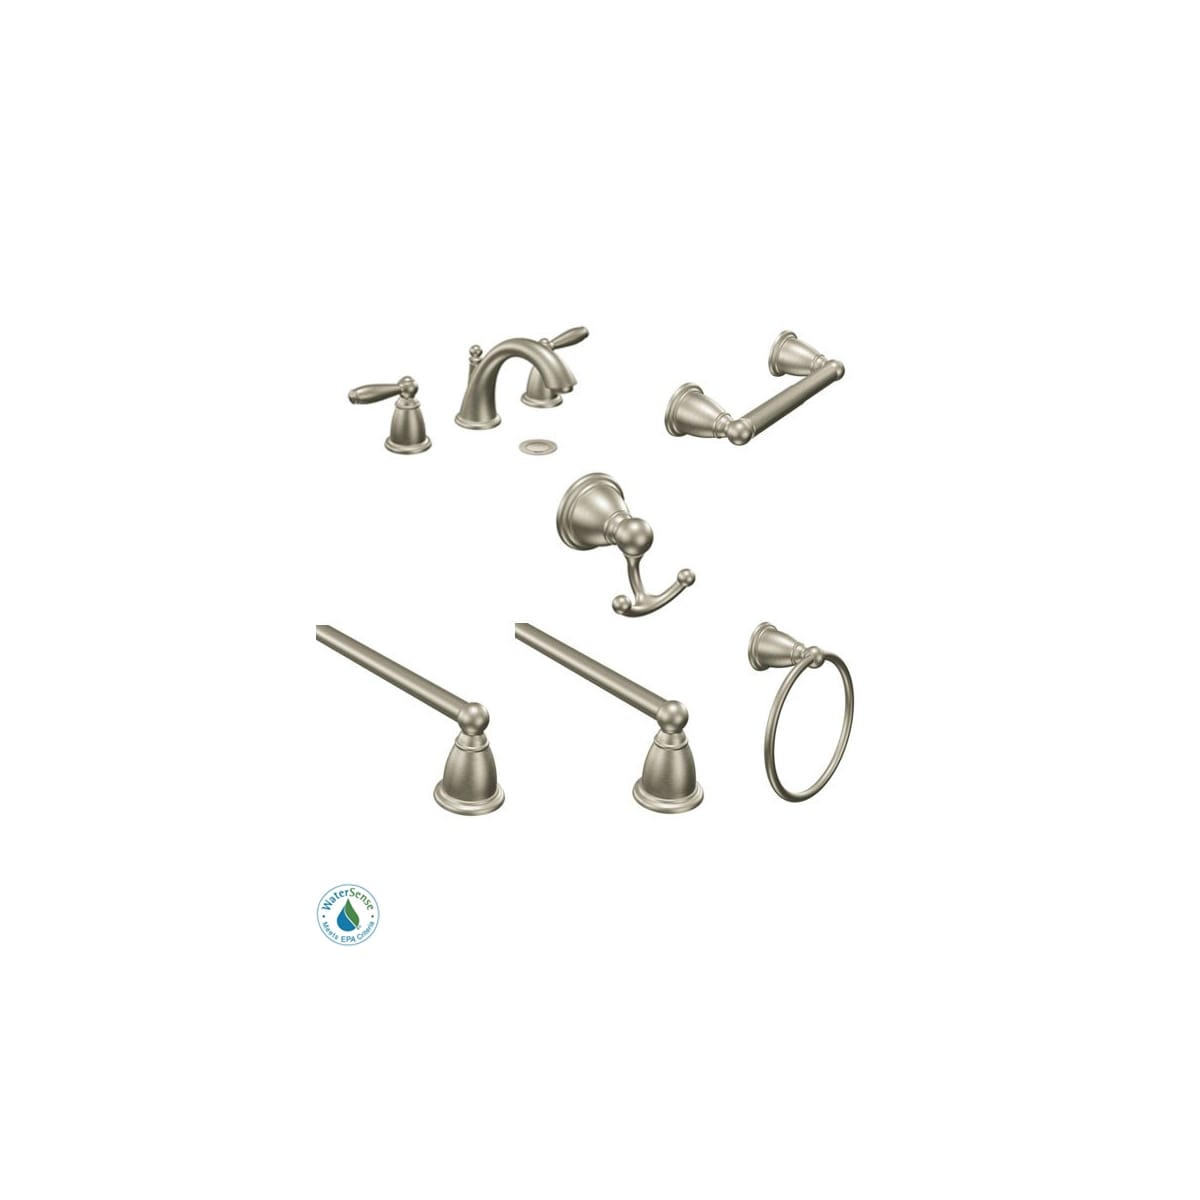 Moen Brantford Faucet And Accessory Bundle 4bn Brushed Nickel With